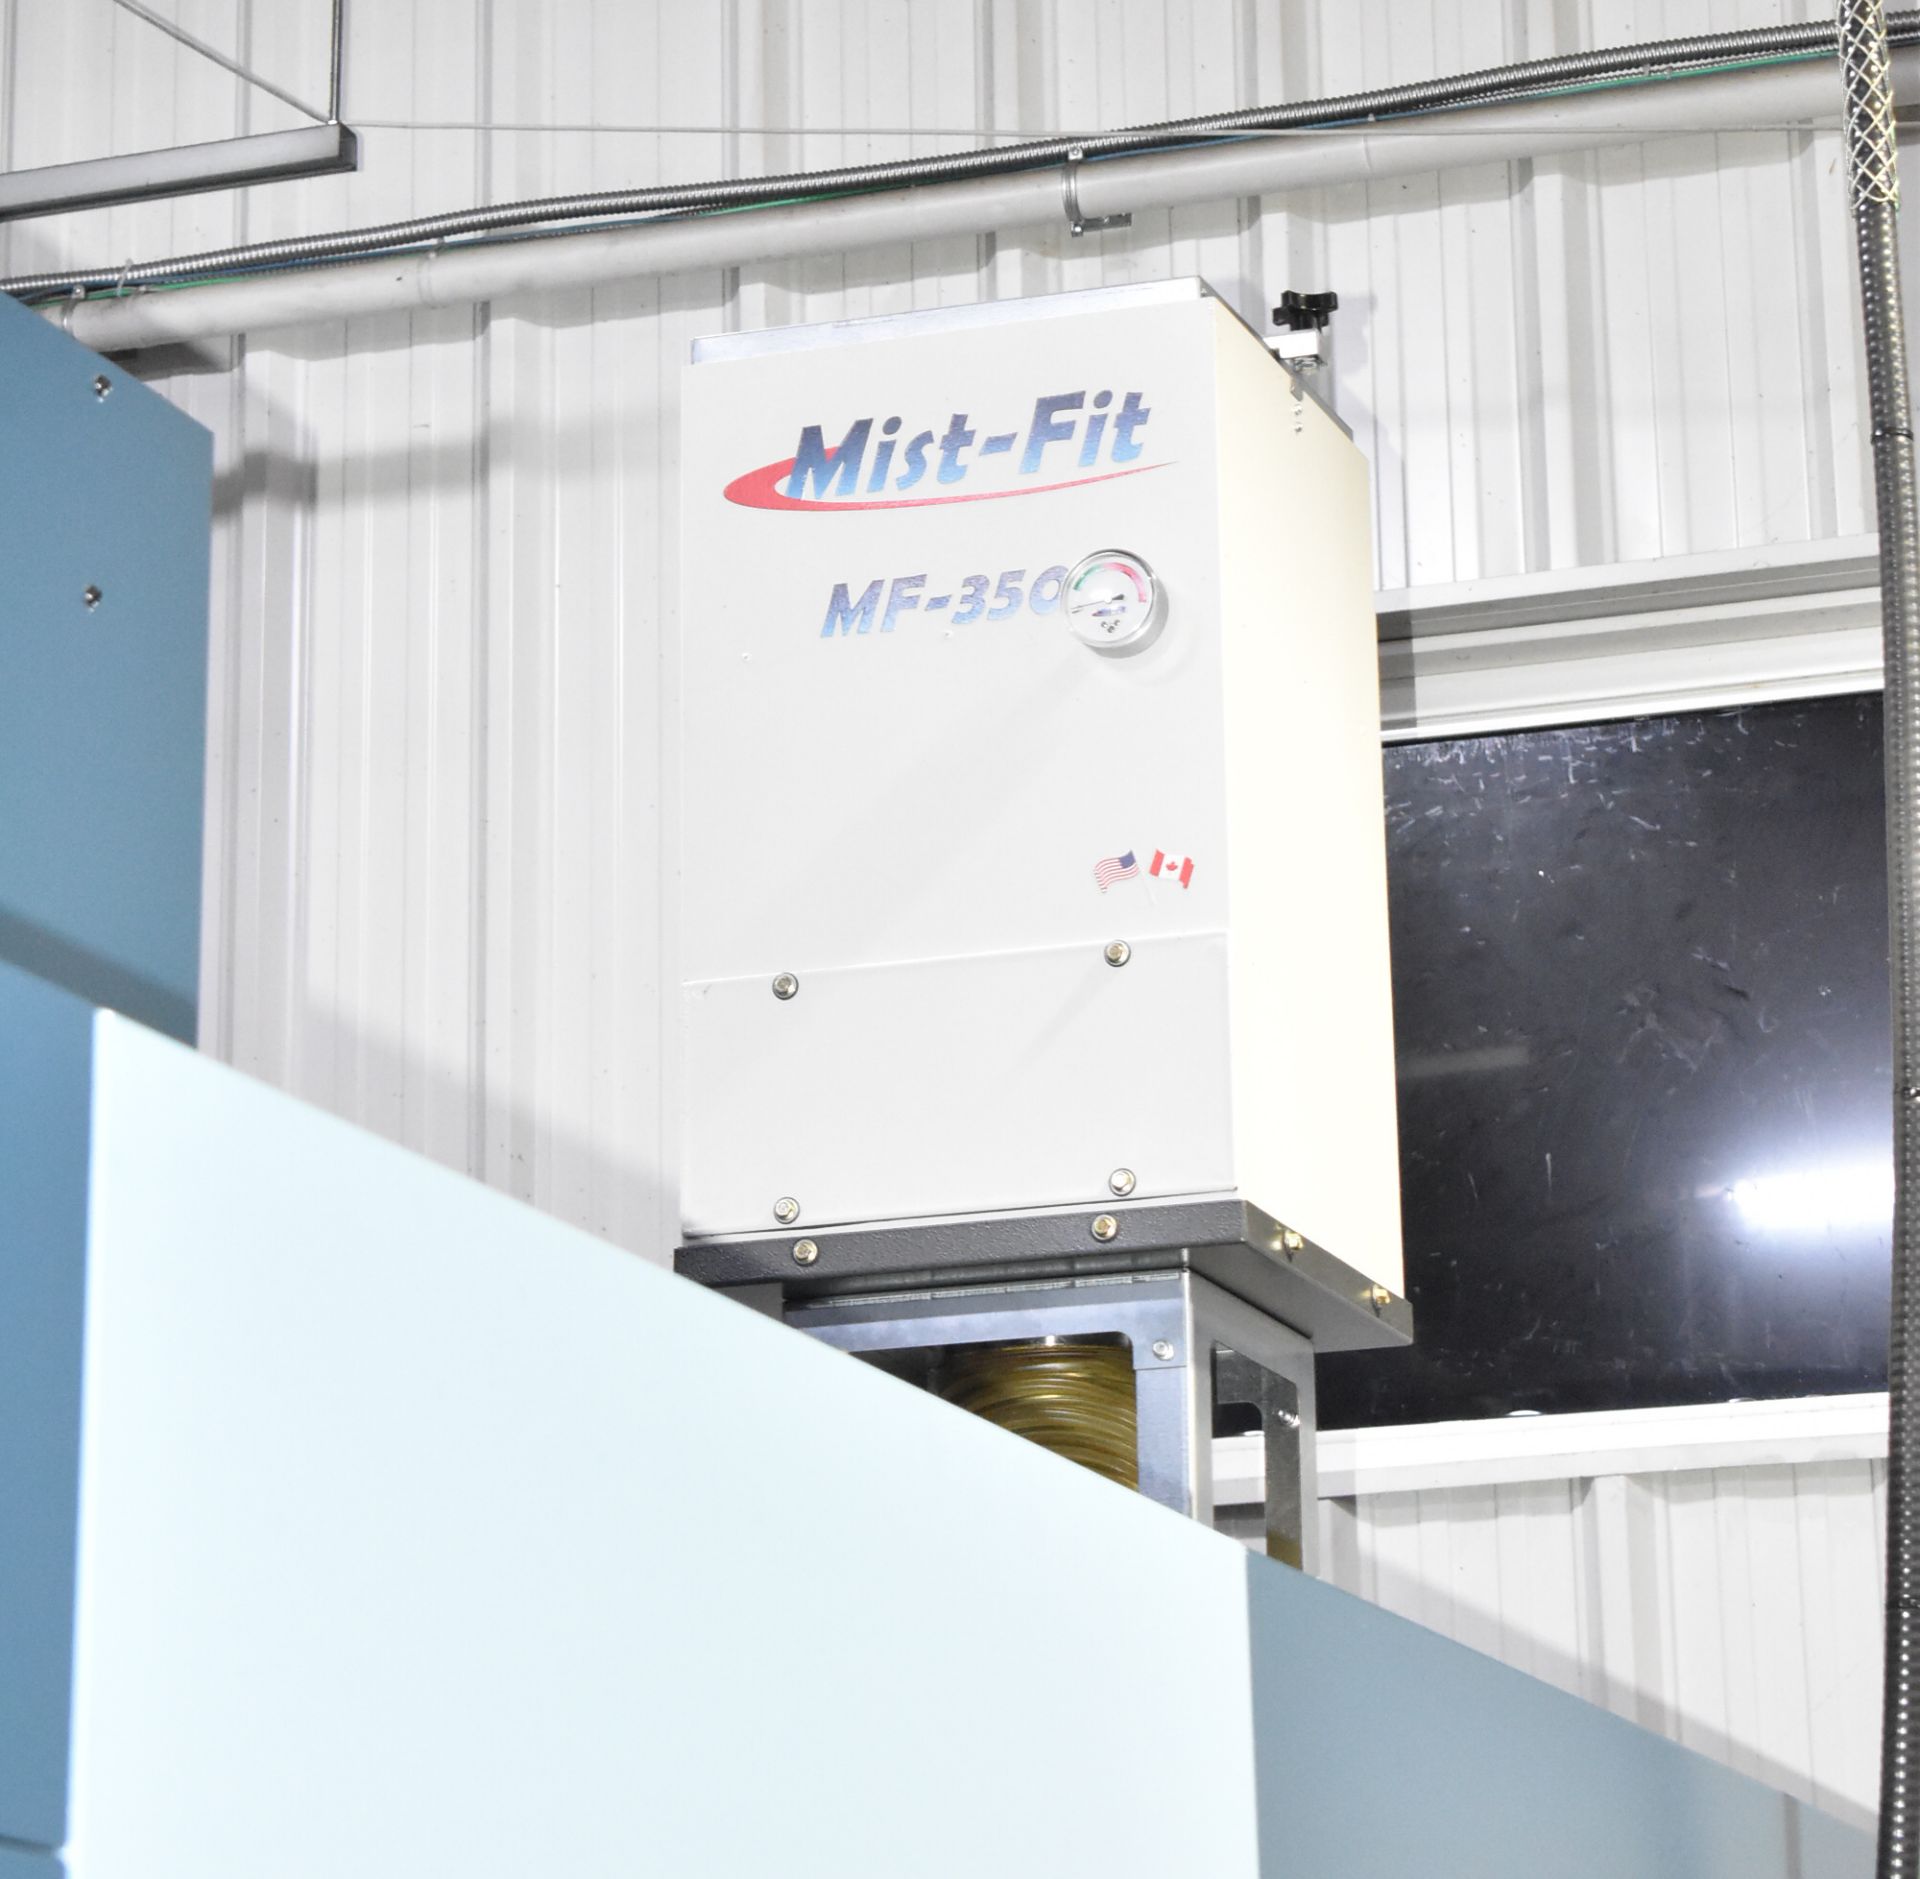 MATSUURA (2019) MX-520 PC4 MULTI-PALLET FULL 5-AXIS HIGH-SPEED CNC VERTICAL MACHINING CENTER WITH - Image 10 of 12